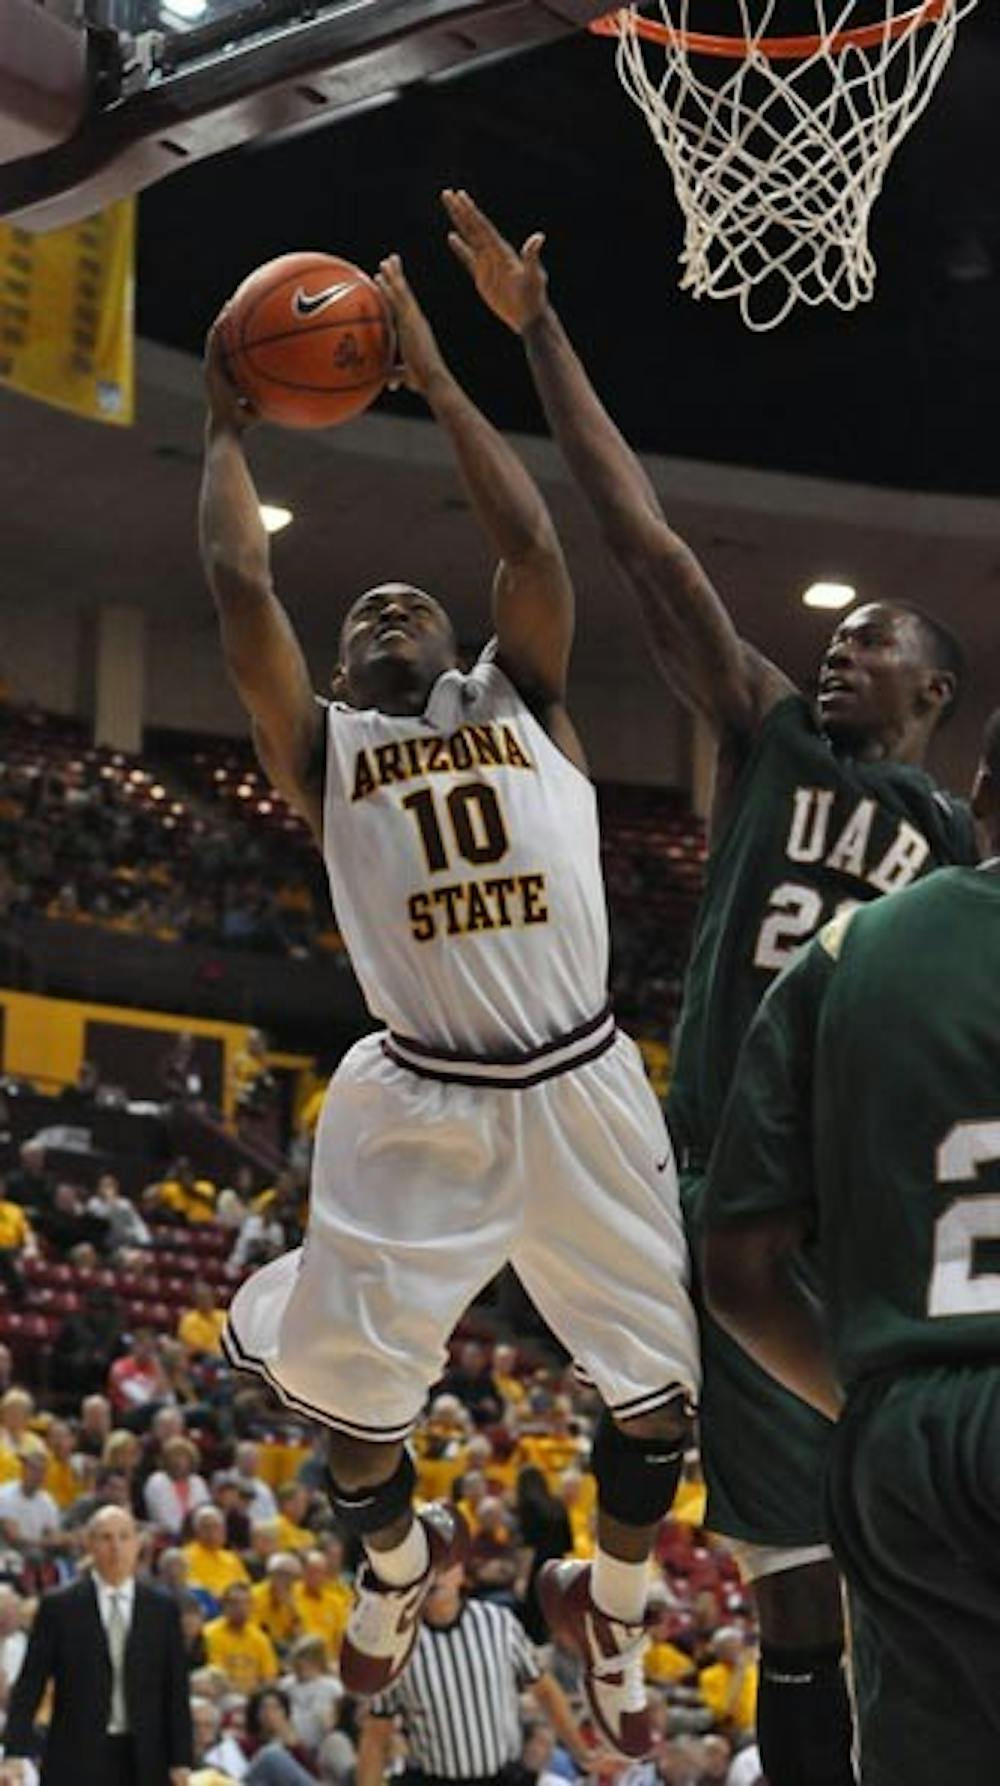 RISE UP: Senior guard Jamelle McMillan goes up for a layup against UAB during the Sun Devils home opener on Nov. 20. ASU fell to the undefeated No. 11 Baylor Bears 68-54 Thursday night. (Photo by Aaron Lavinsky)